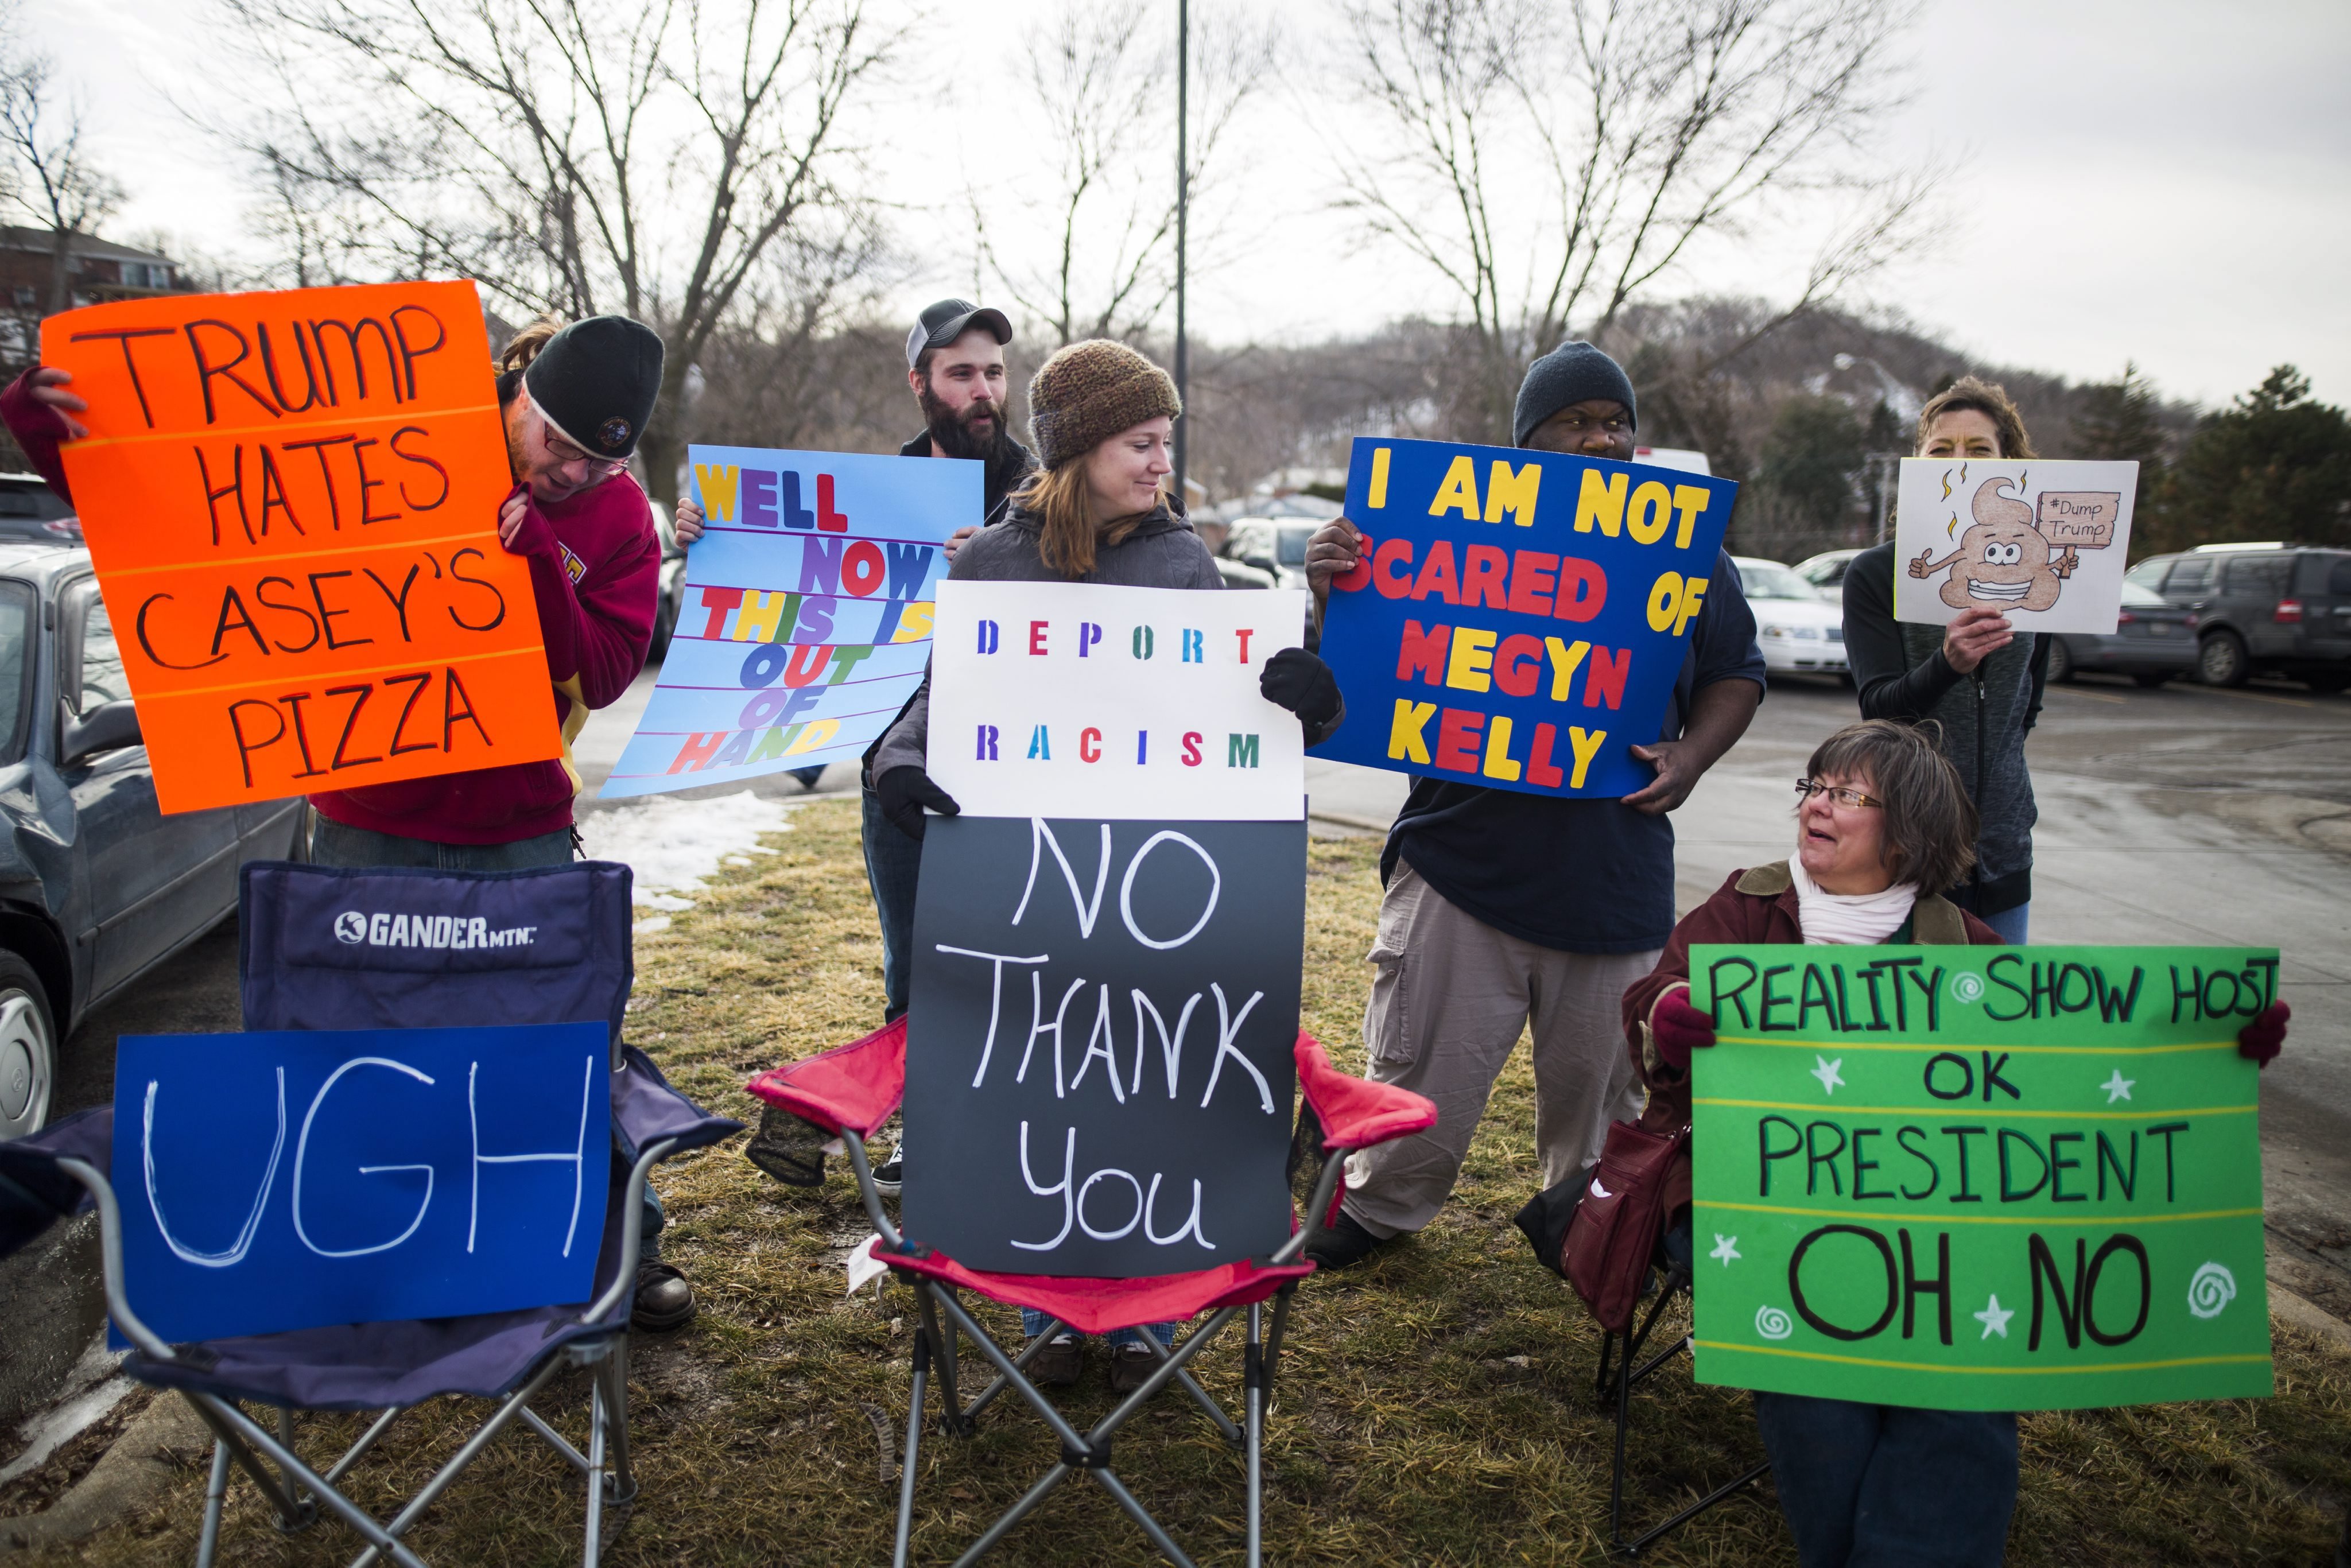 Protestors gather outside a campaign event for Republican presidential candidate Donald Trump at the Gerald Kirn Middle School in Council Bluffs, Iowa on Jan. 31 2016. (Jim Lo Scalzo—EPA)